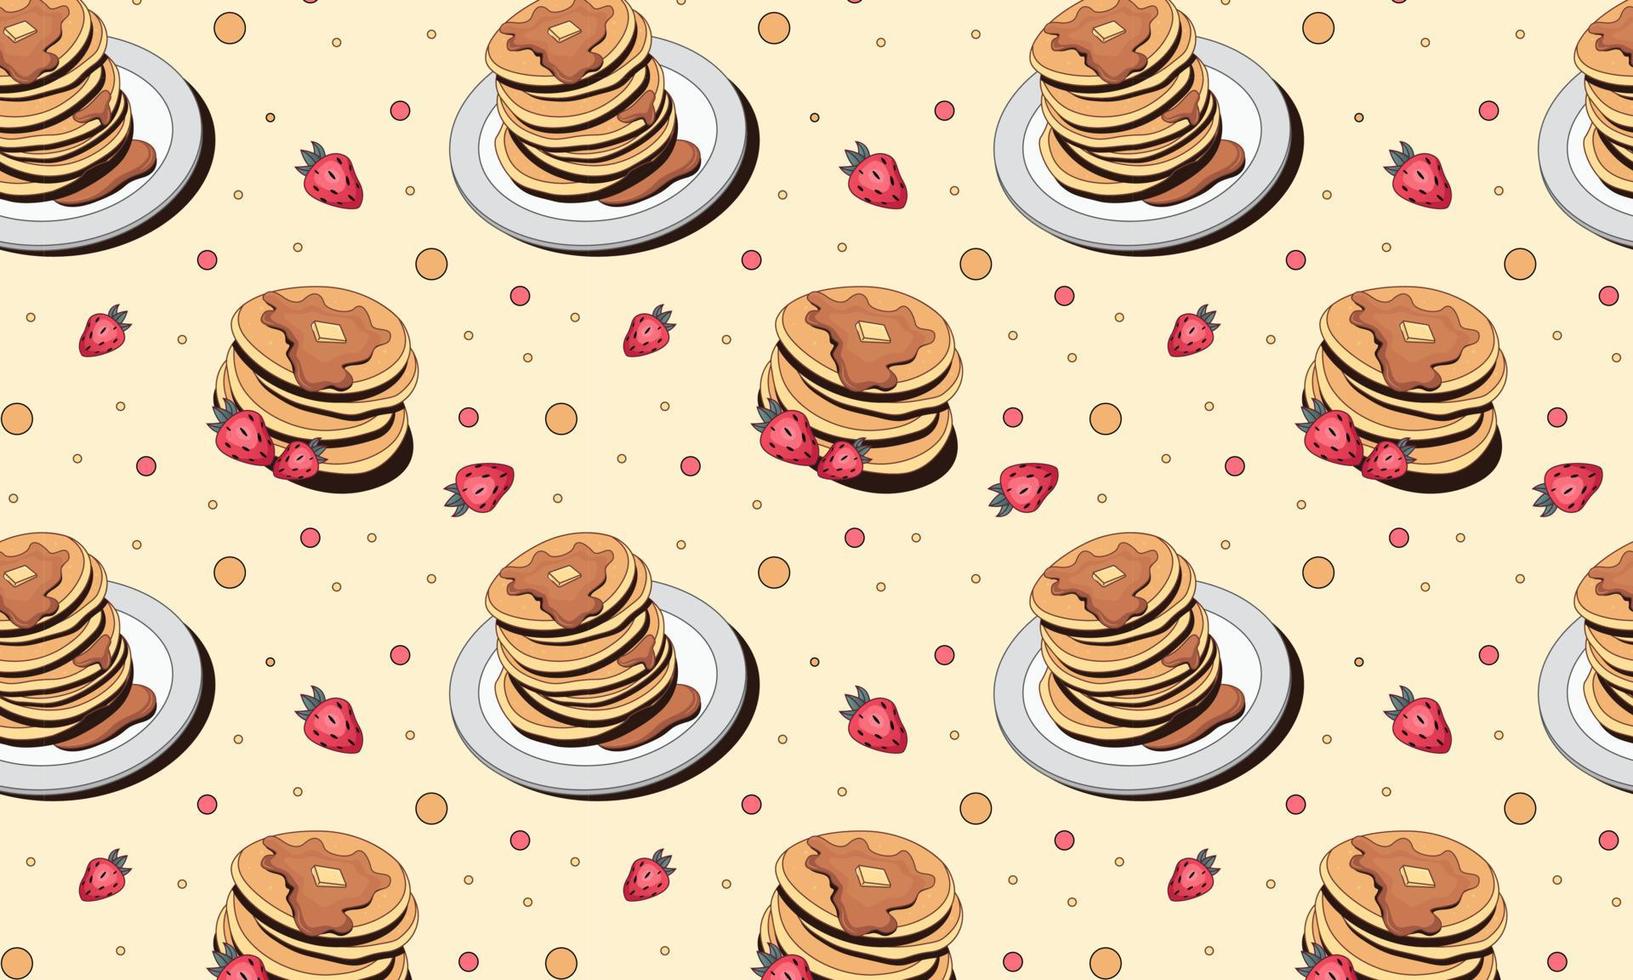 Pancake and strawberry pattern vector